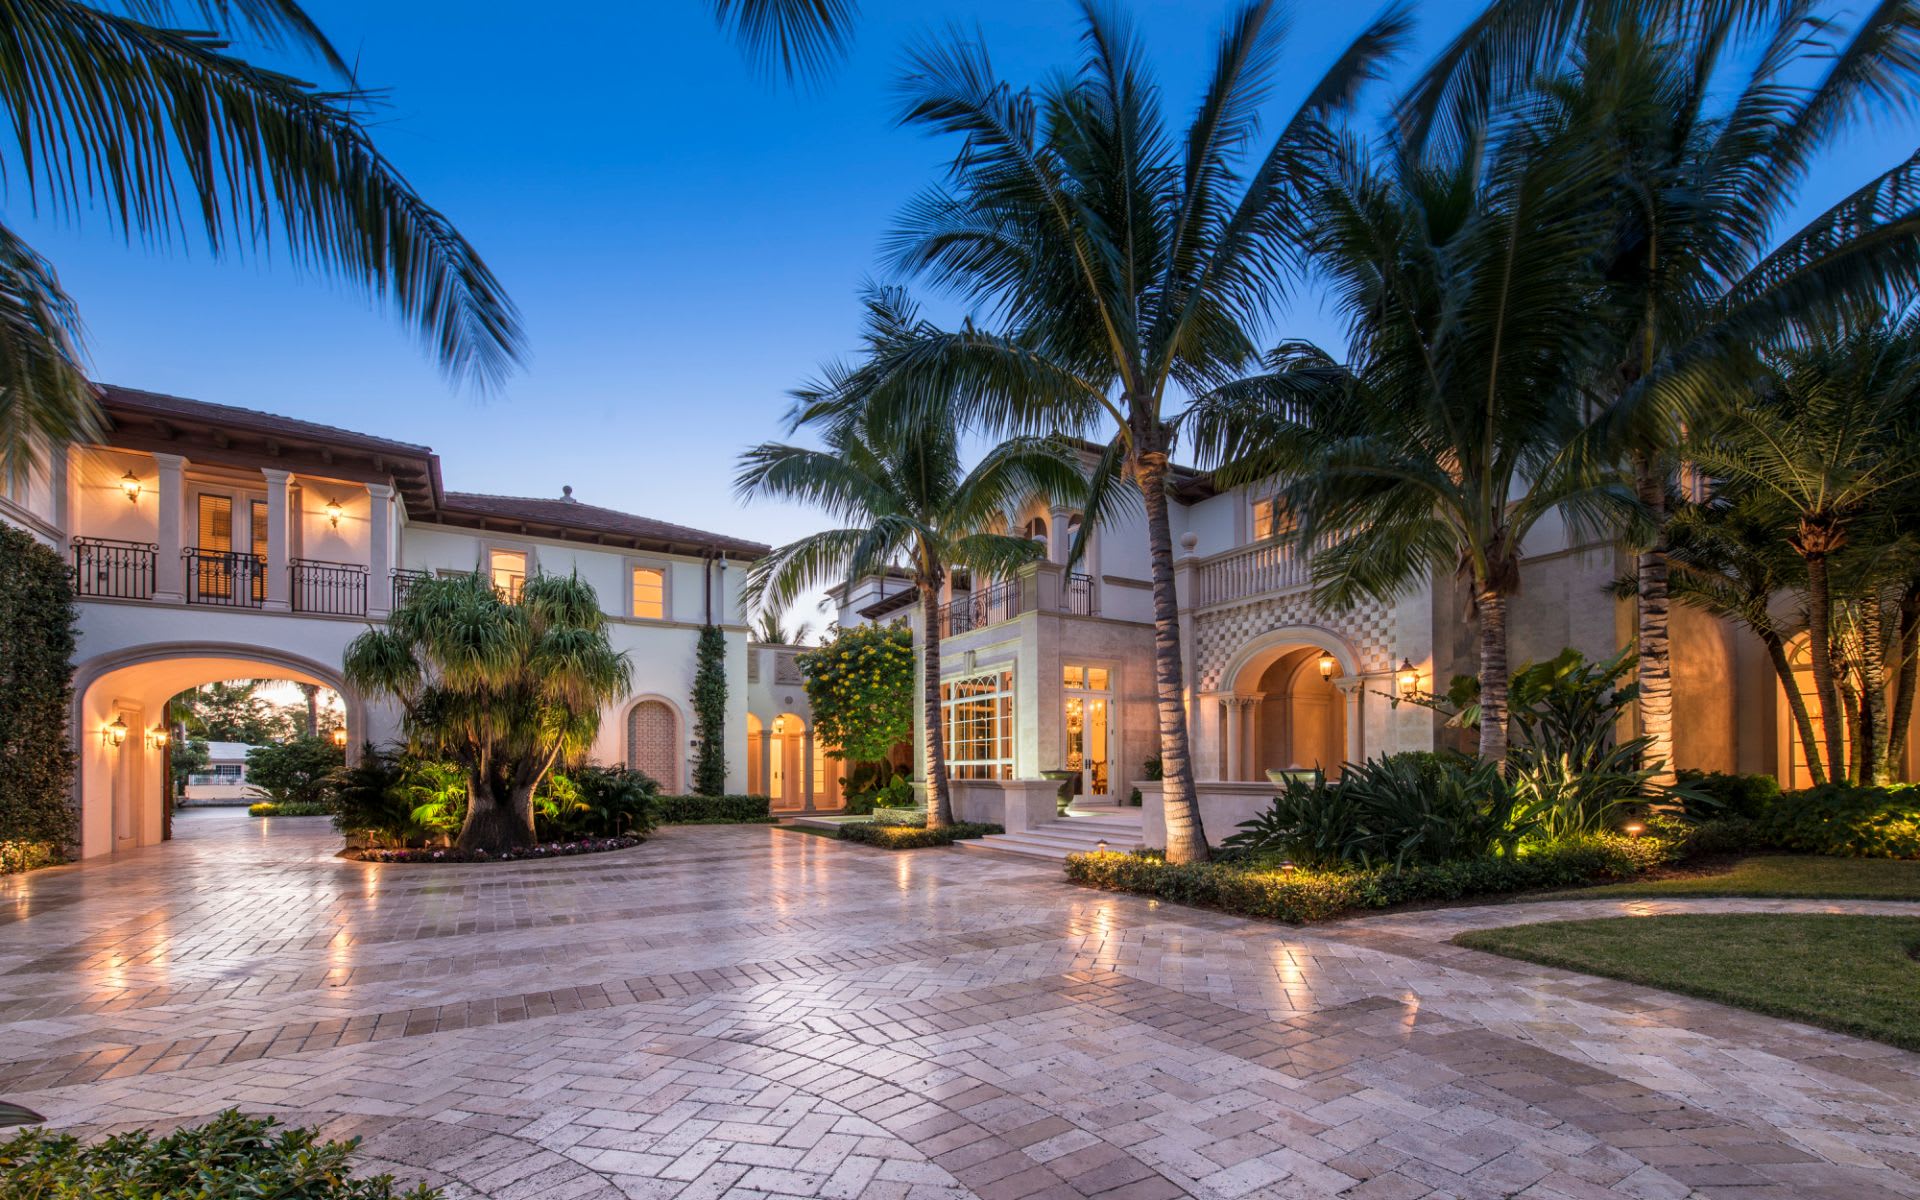 A view of a large mansion in Fort Lauderdale with palm trees and a driveway